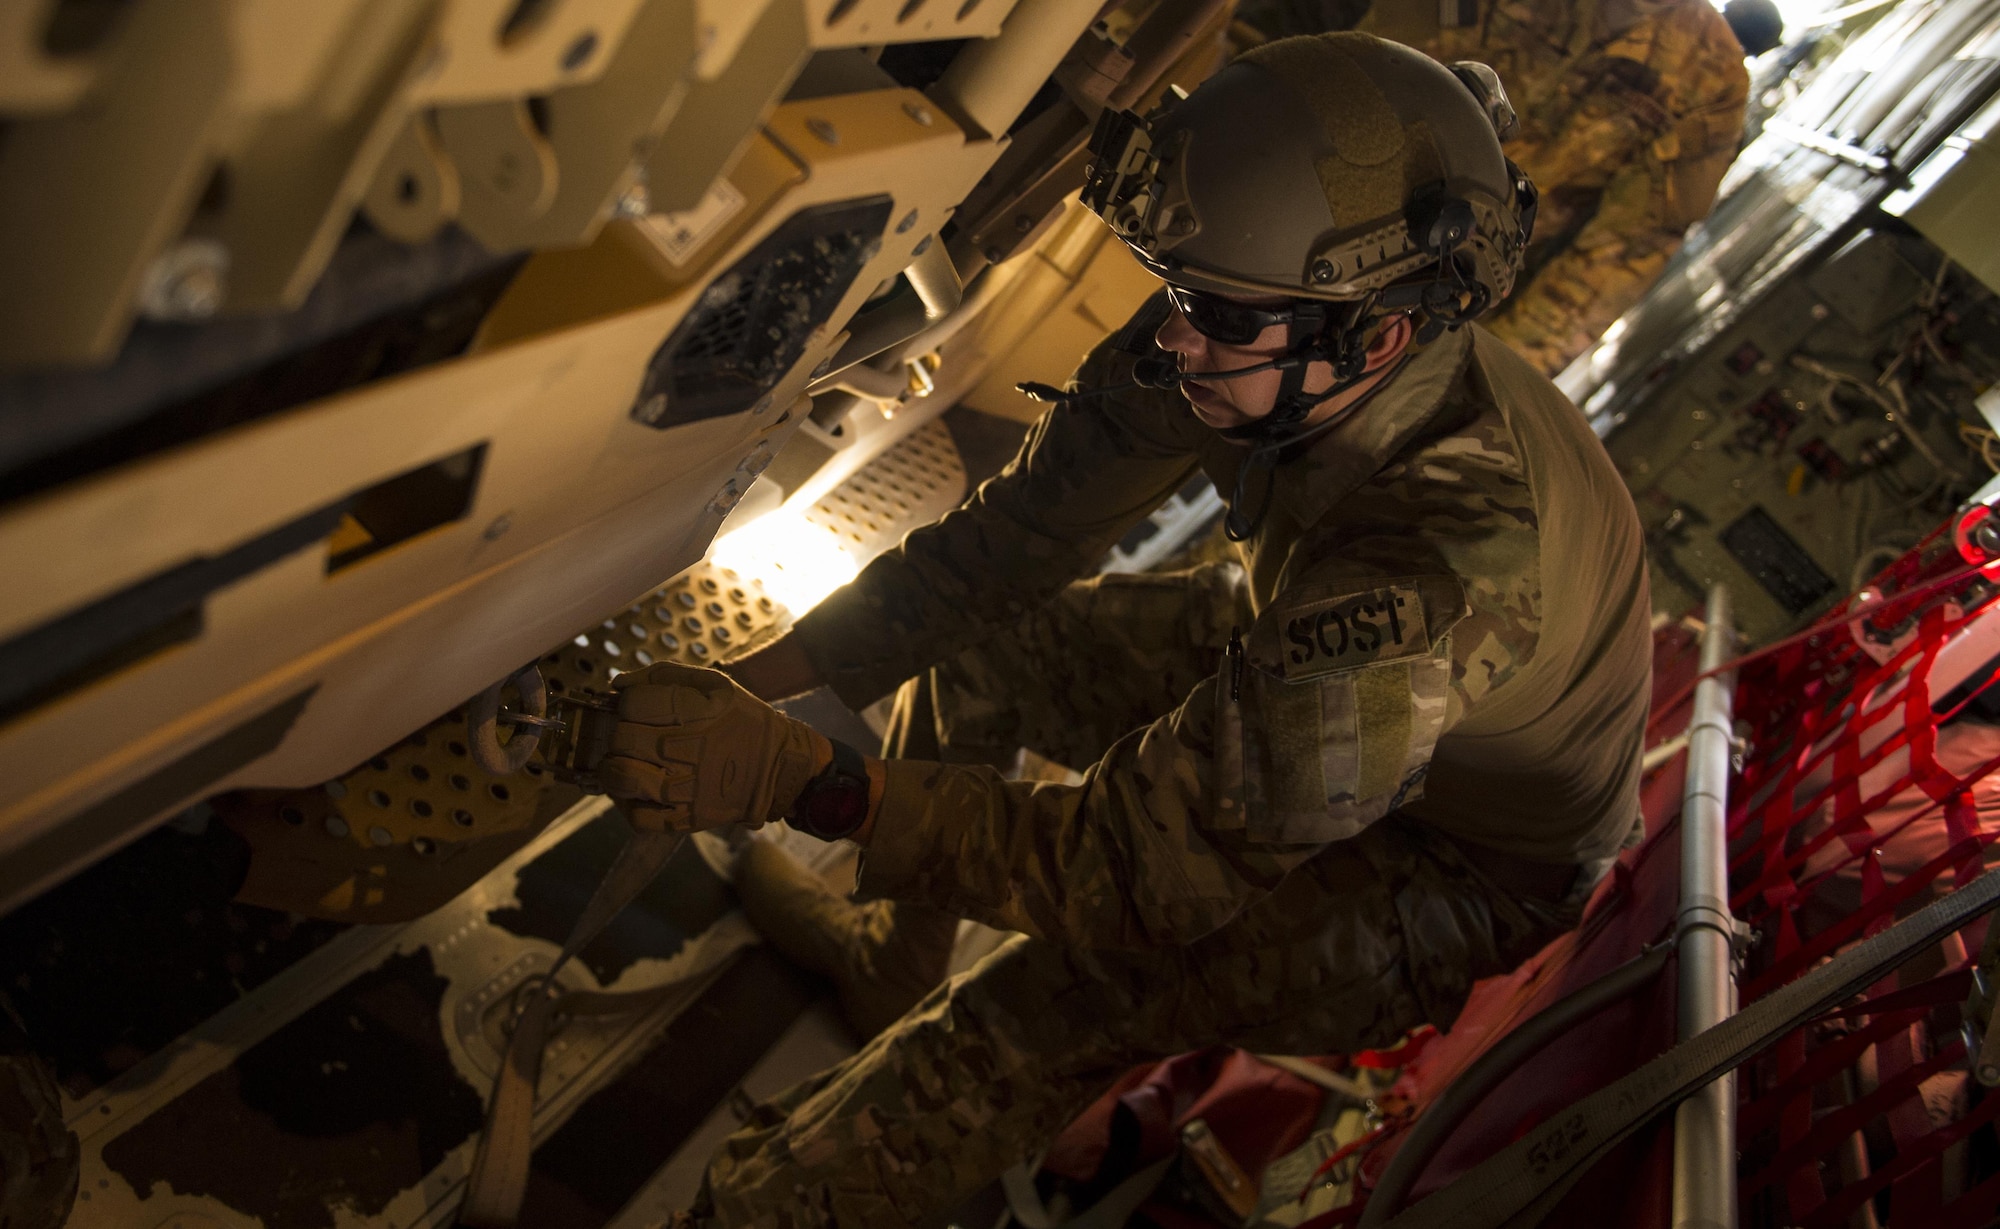 A U.S. Air Force Airman from the 24th Special Operations Wing trains during a static load training during Exercise Emerald Warrior at Hurlburt Field, Fla., Feb. 26, 2017. Emerald Warrior is a U.S. Special Operations Command exercise during which joint special operations forces train to respond to various threats across the spectrum of conflict. (U.S. Air Force photo by Senior Airman Erin Piazza)